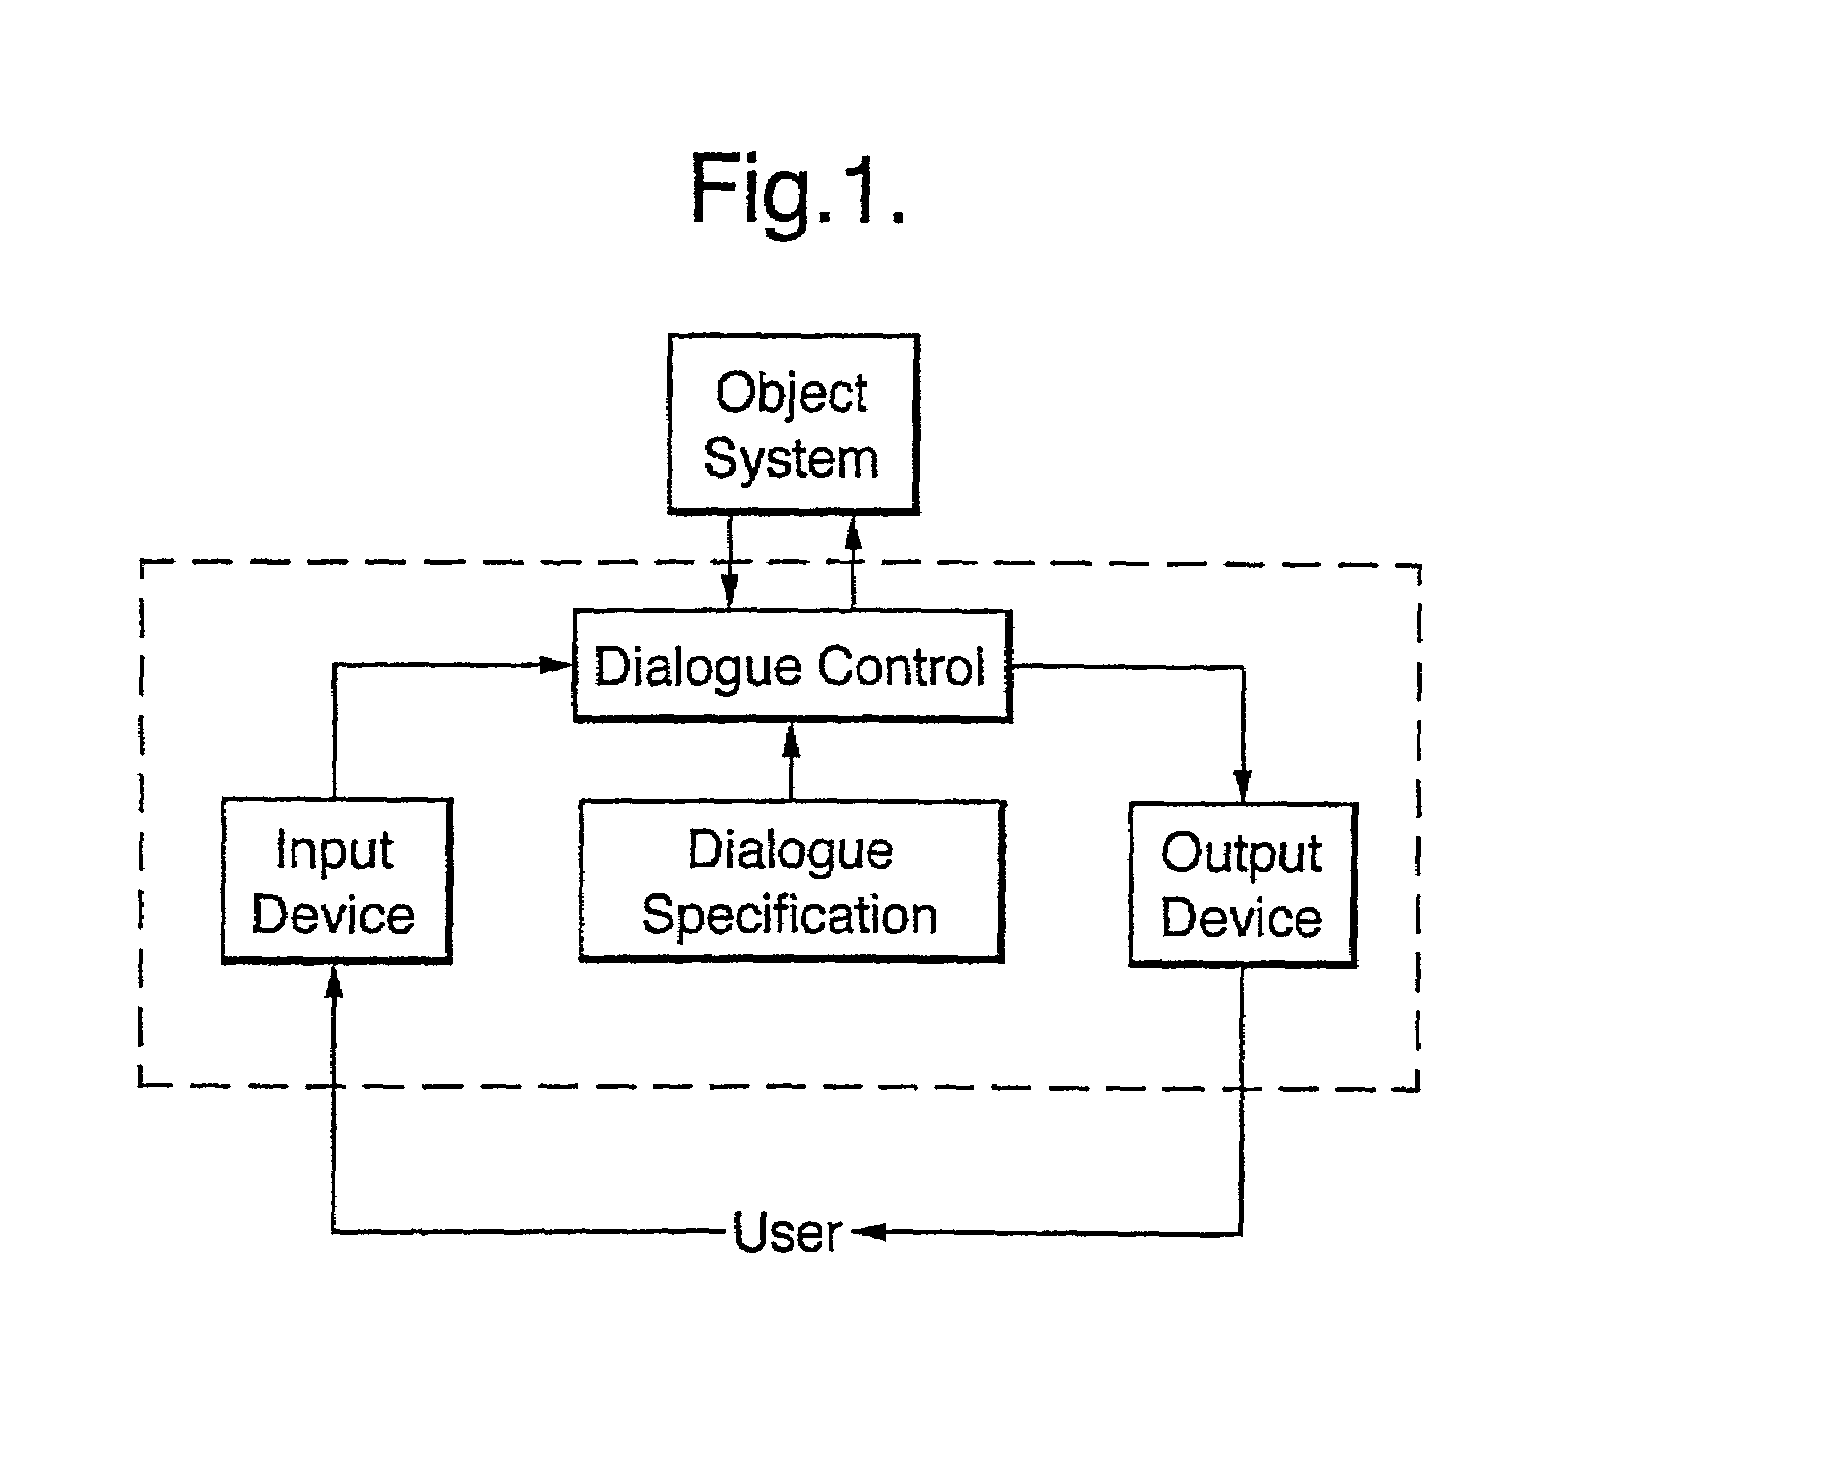 Man-machine dialogue system, controls dialogue between system and user using dialogue specification employing augmented transition networks propagating tokens